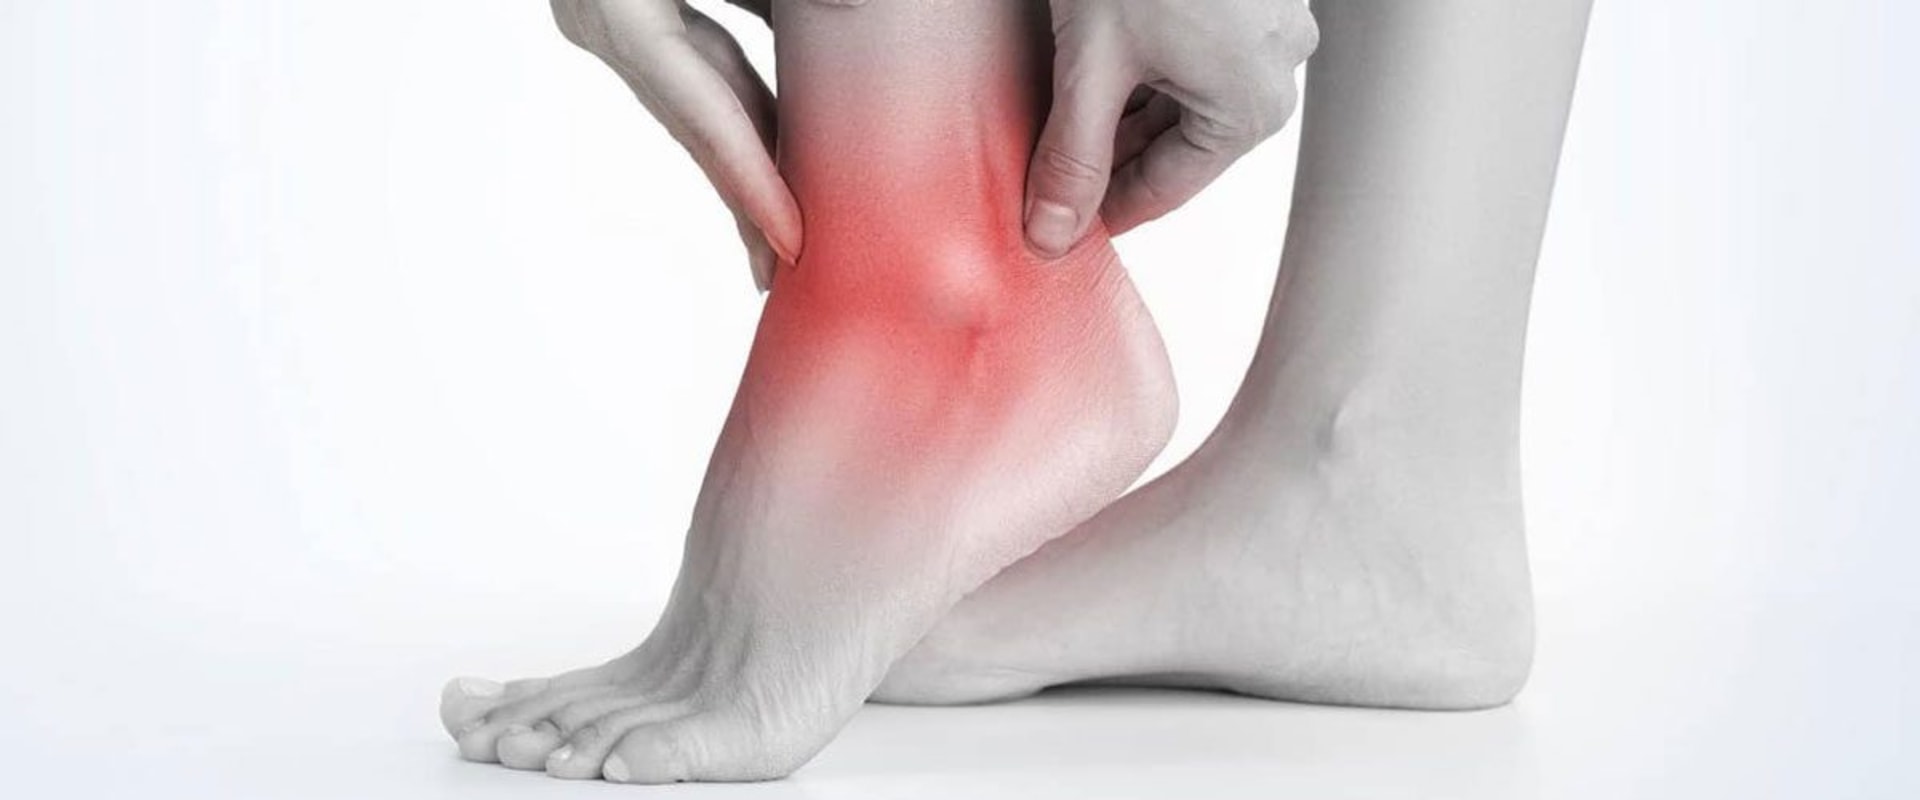 Can a Chiropractor Help You Recover from an Ankle Sprain?